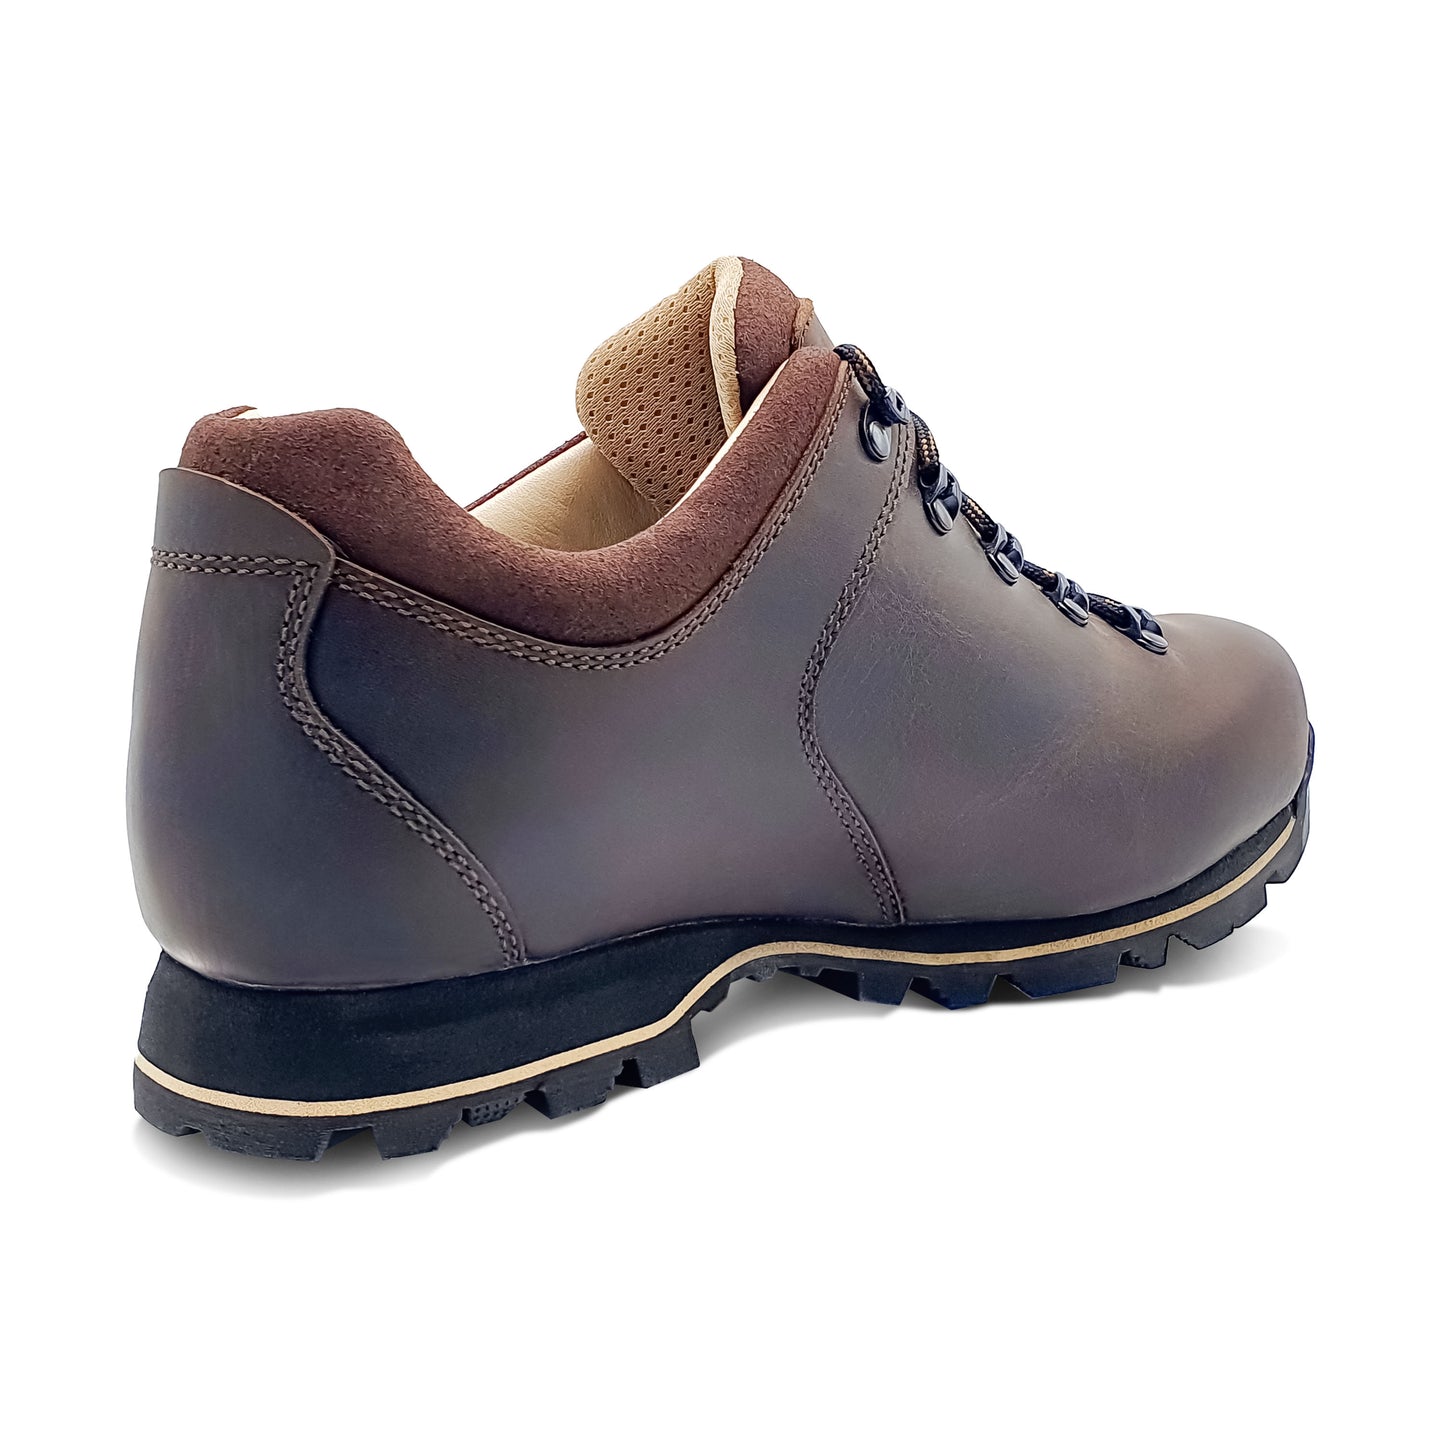 New ANATOM Q1 Braemar Walking Shoe with Vibram outsole - PRE-ORDERS AVAILABLE FOR DELIVERY SPRING 24